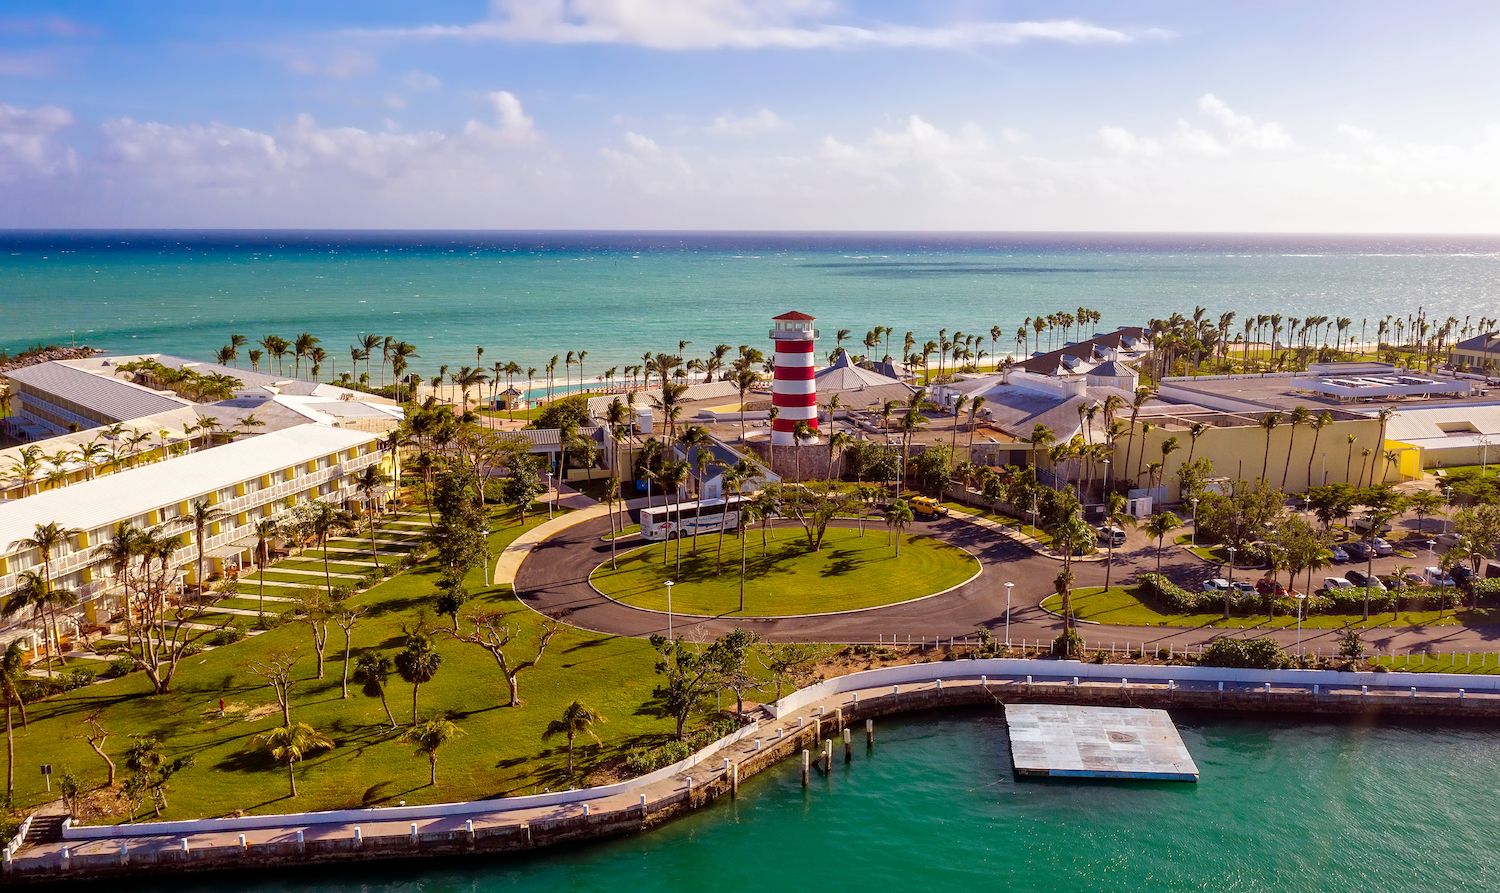 What is Grand Bahama Island most known for?